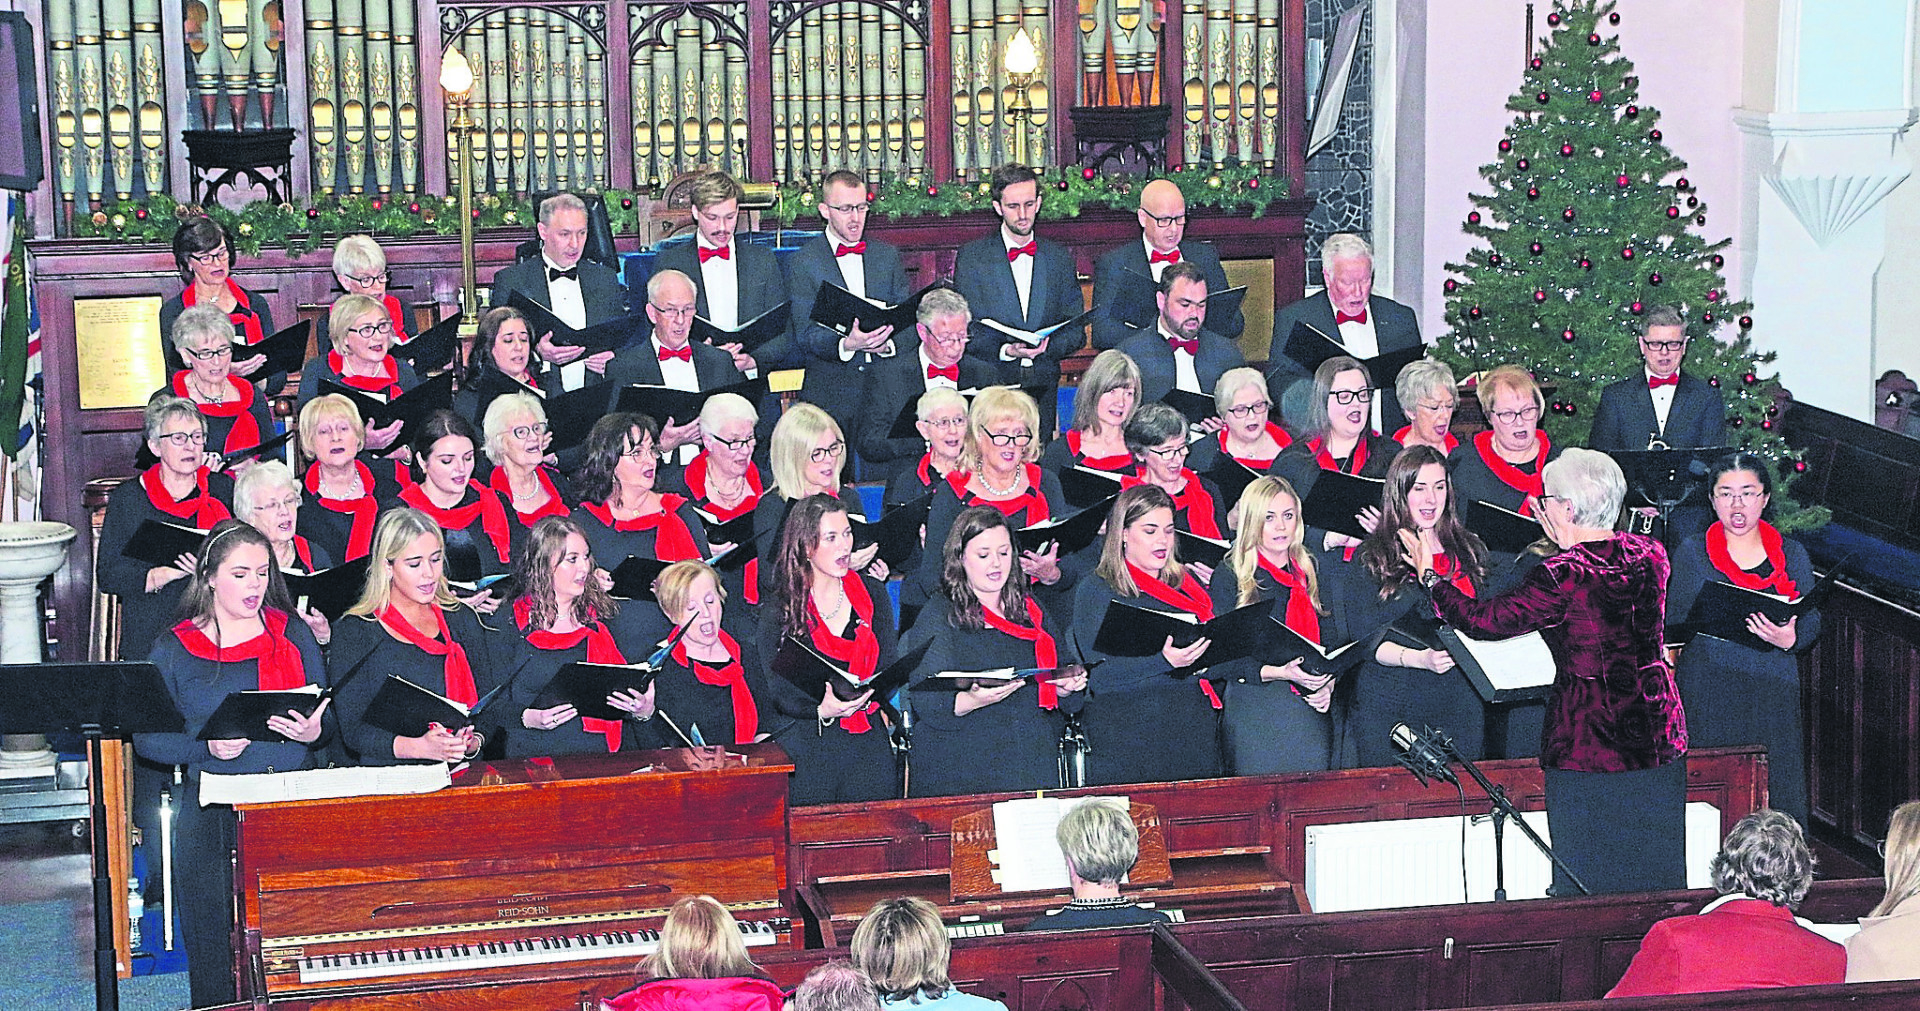 Spring into song at the Burnavon